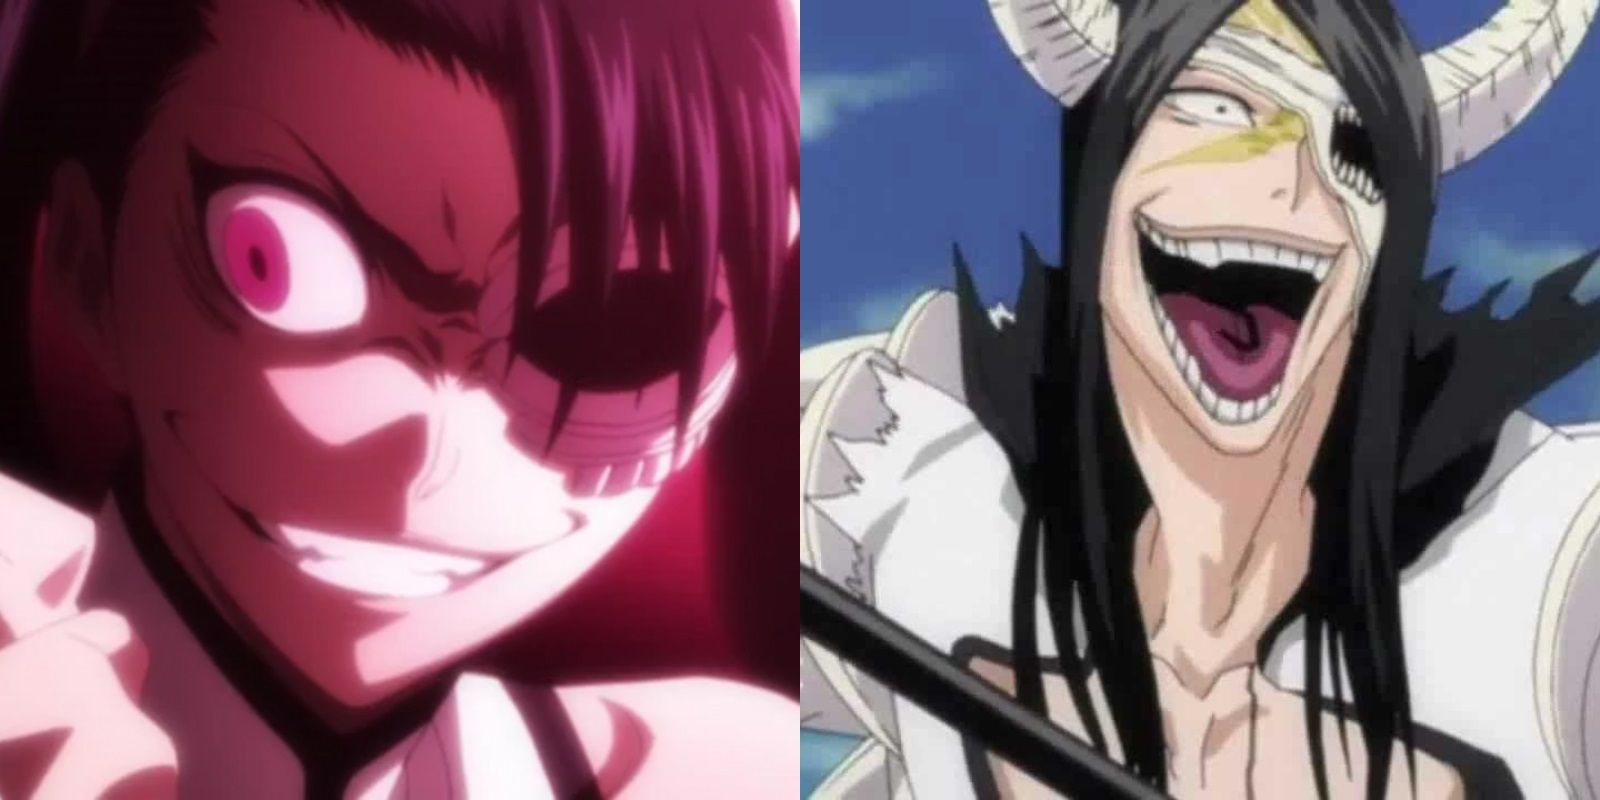 Split image of Loly Aivirrne smiling and Nnoitra Gilga laughing in Bleach